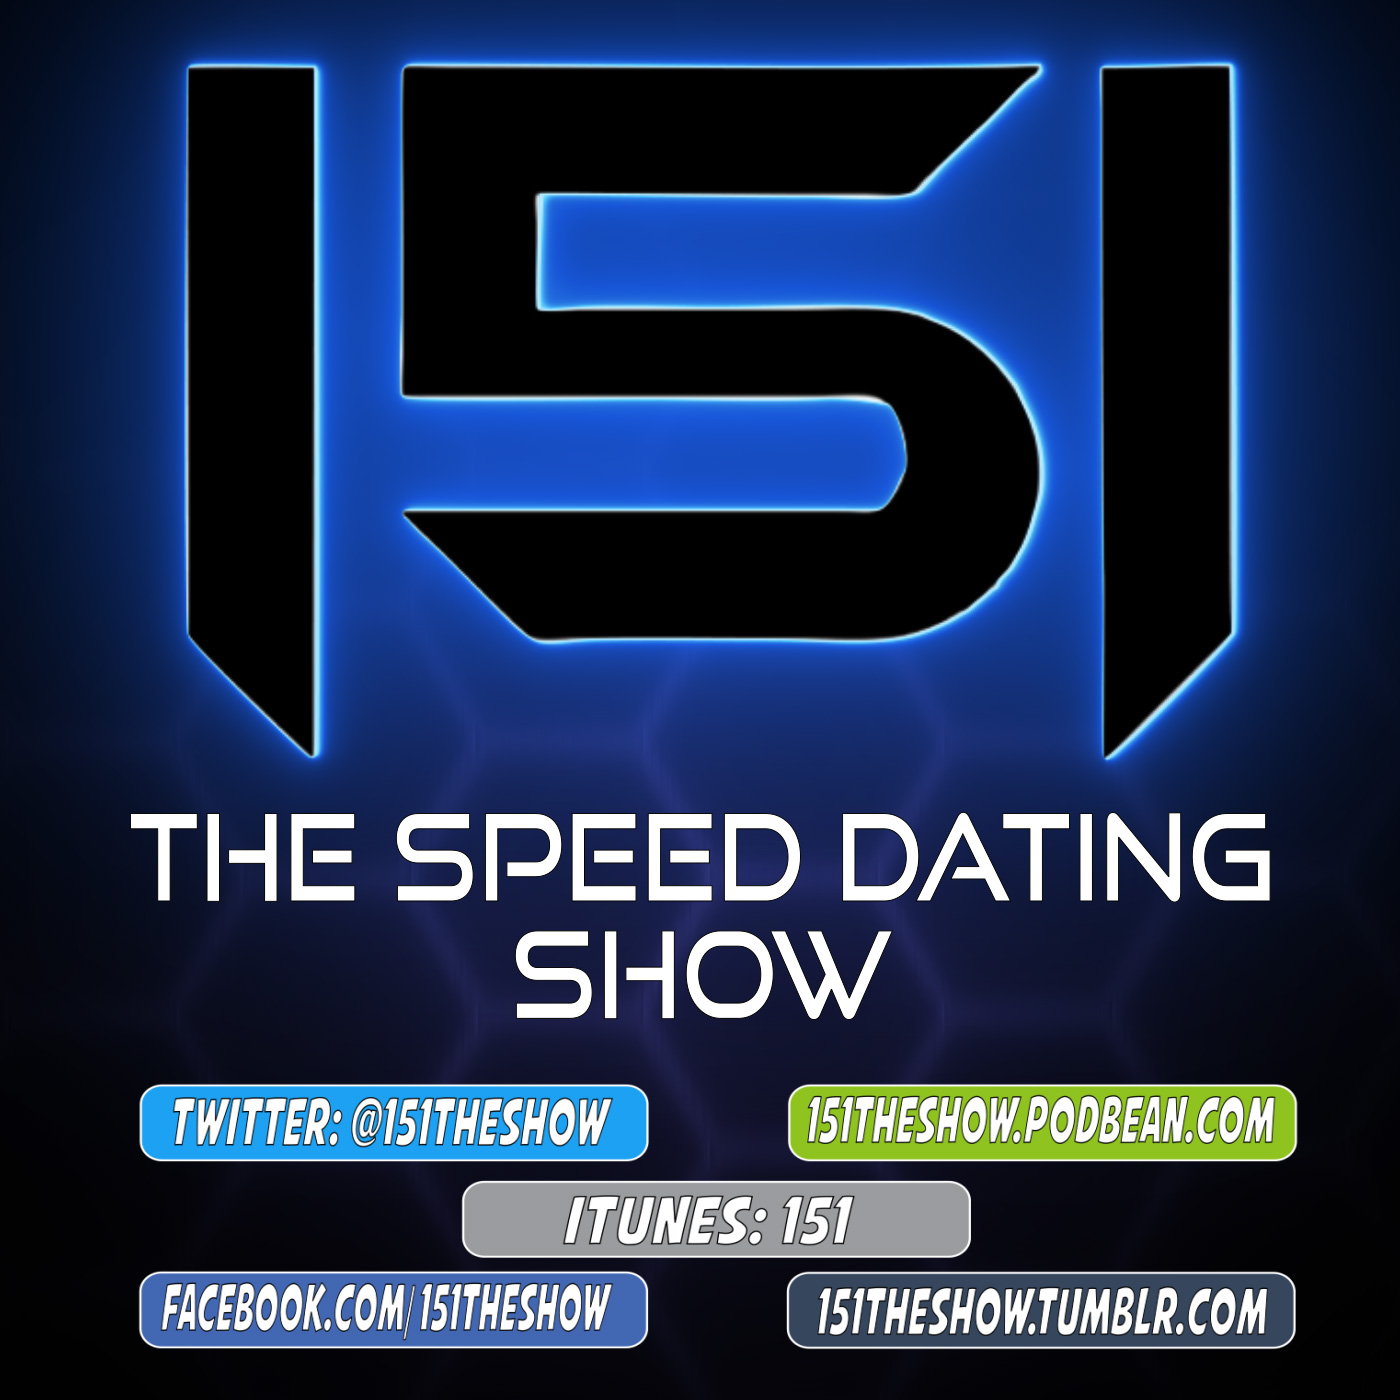 The Speed Dating Show